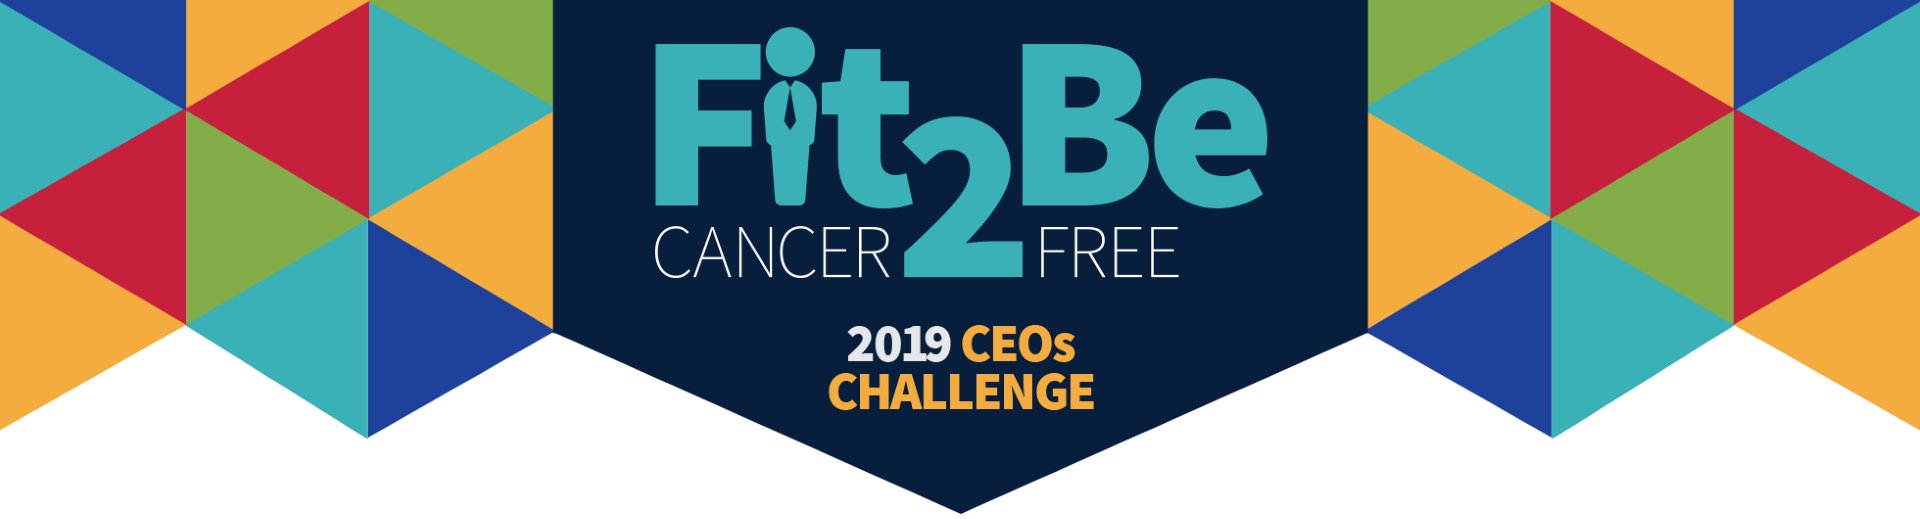 Ceos Against Cancer - Million Euro Challenge 2009 (1920x519), Png Download